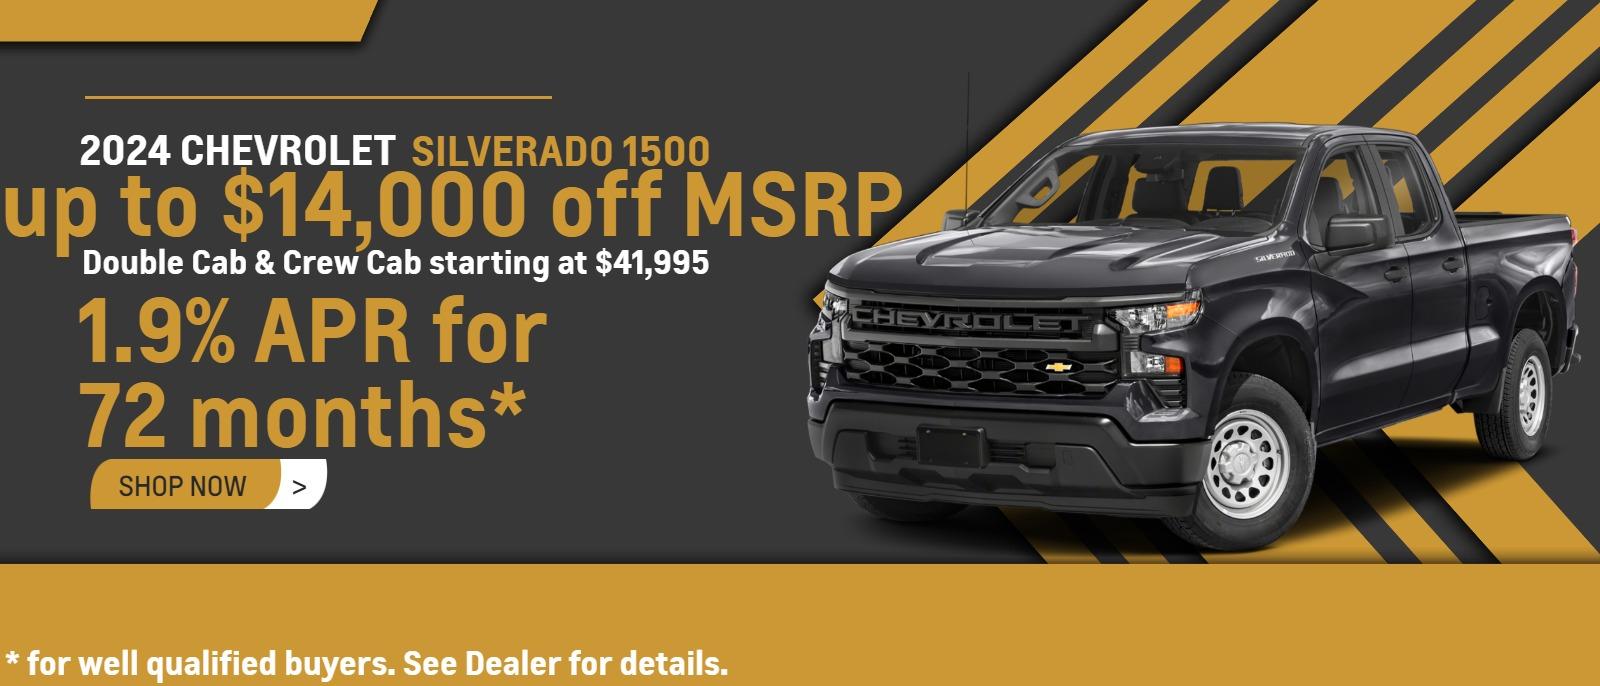 2024 Silverado 1500 up to $14,000 off MSRP 1.9% APR 72 months well qualified buyers